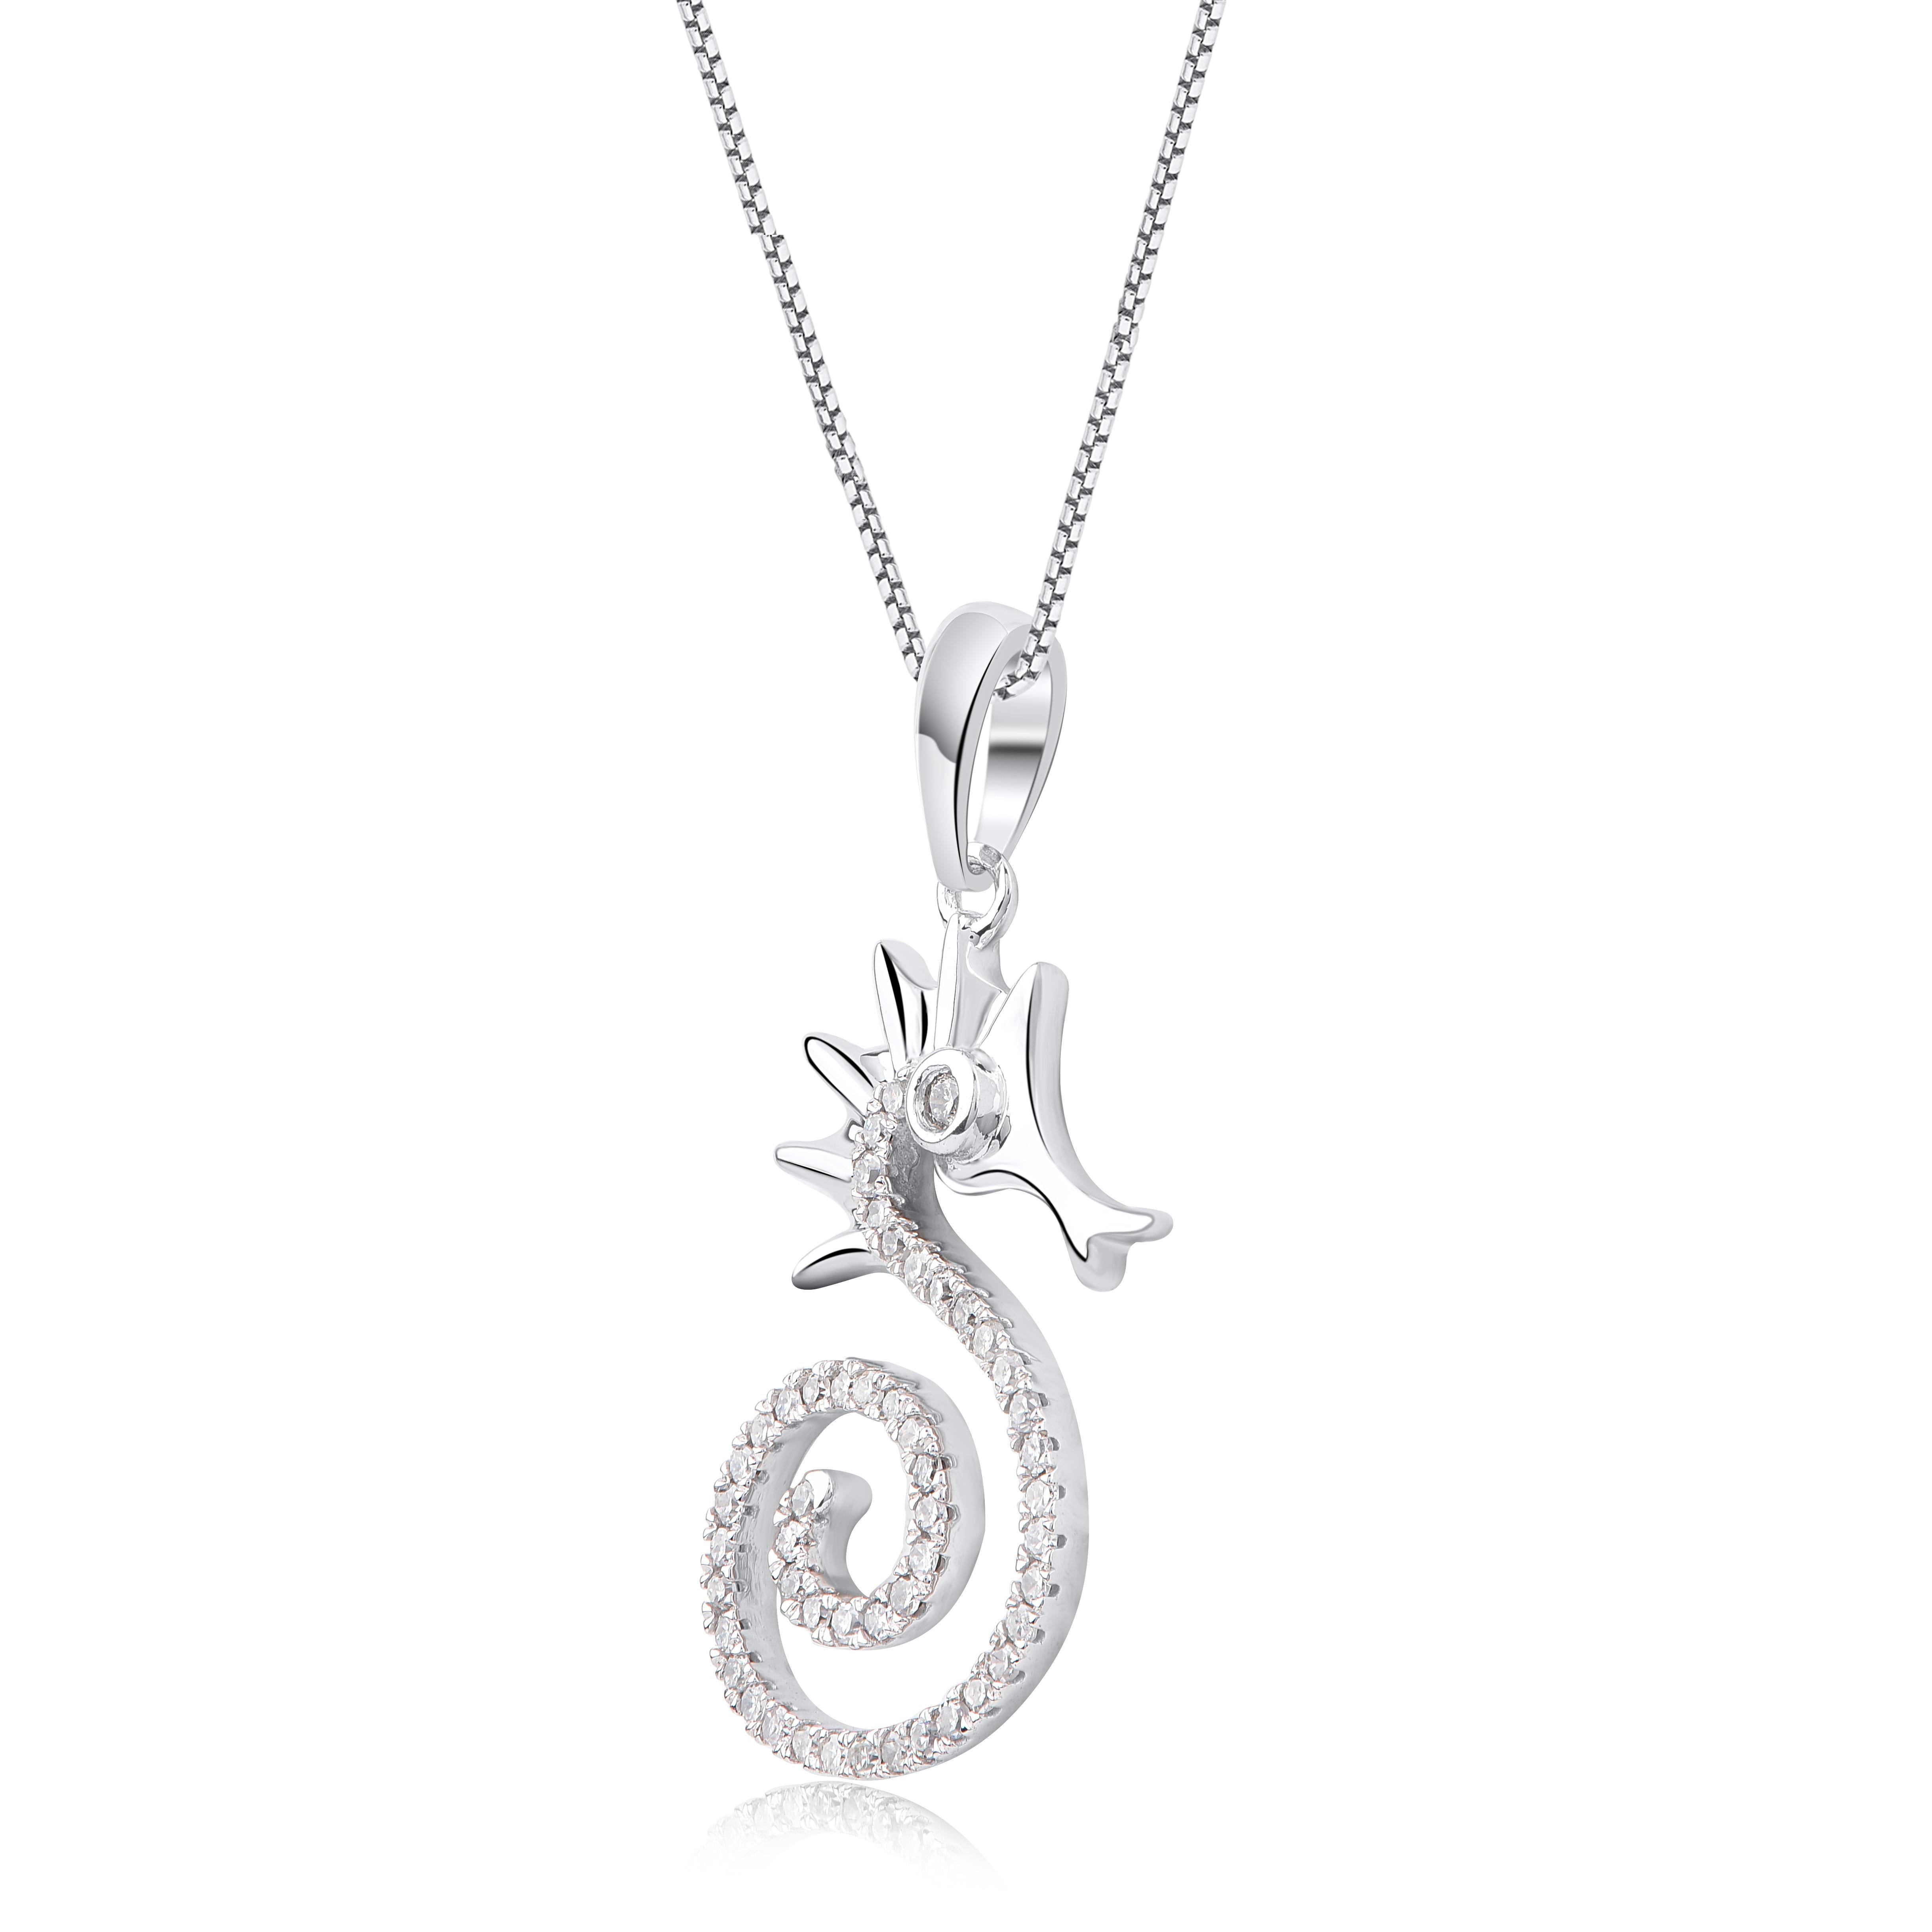 Complete your beach outfit with this diamond seahorse pendant. Made by skillful craftsmen in 14KT white gold and studded with 50 round single cut & brilliant cut natural white diamonds in bezel & prong setting and shine in H-I Color I2 Clarity. The